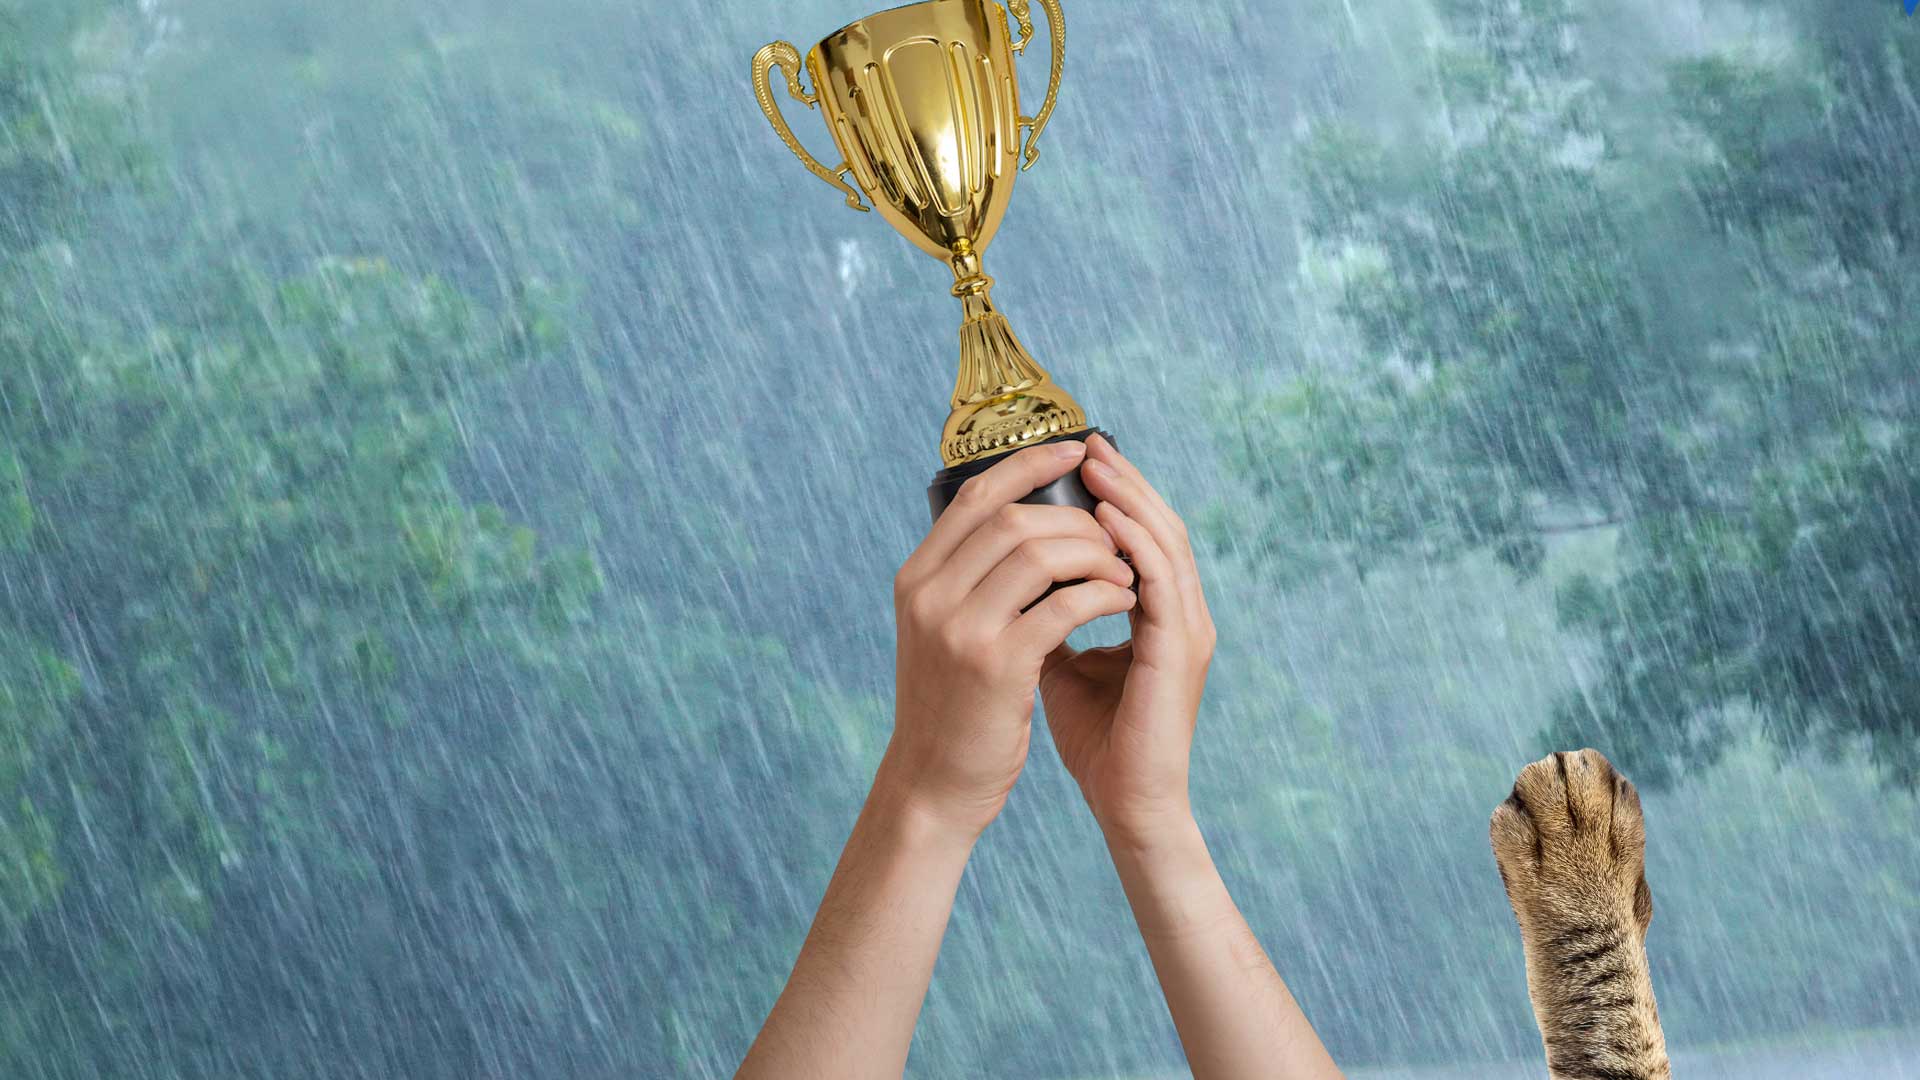 A football trophy being held aloft on a rainy day